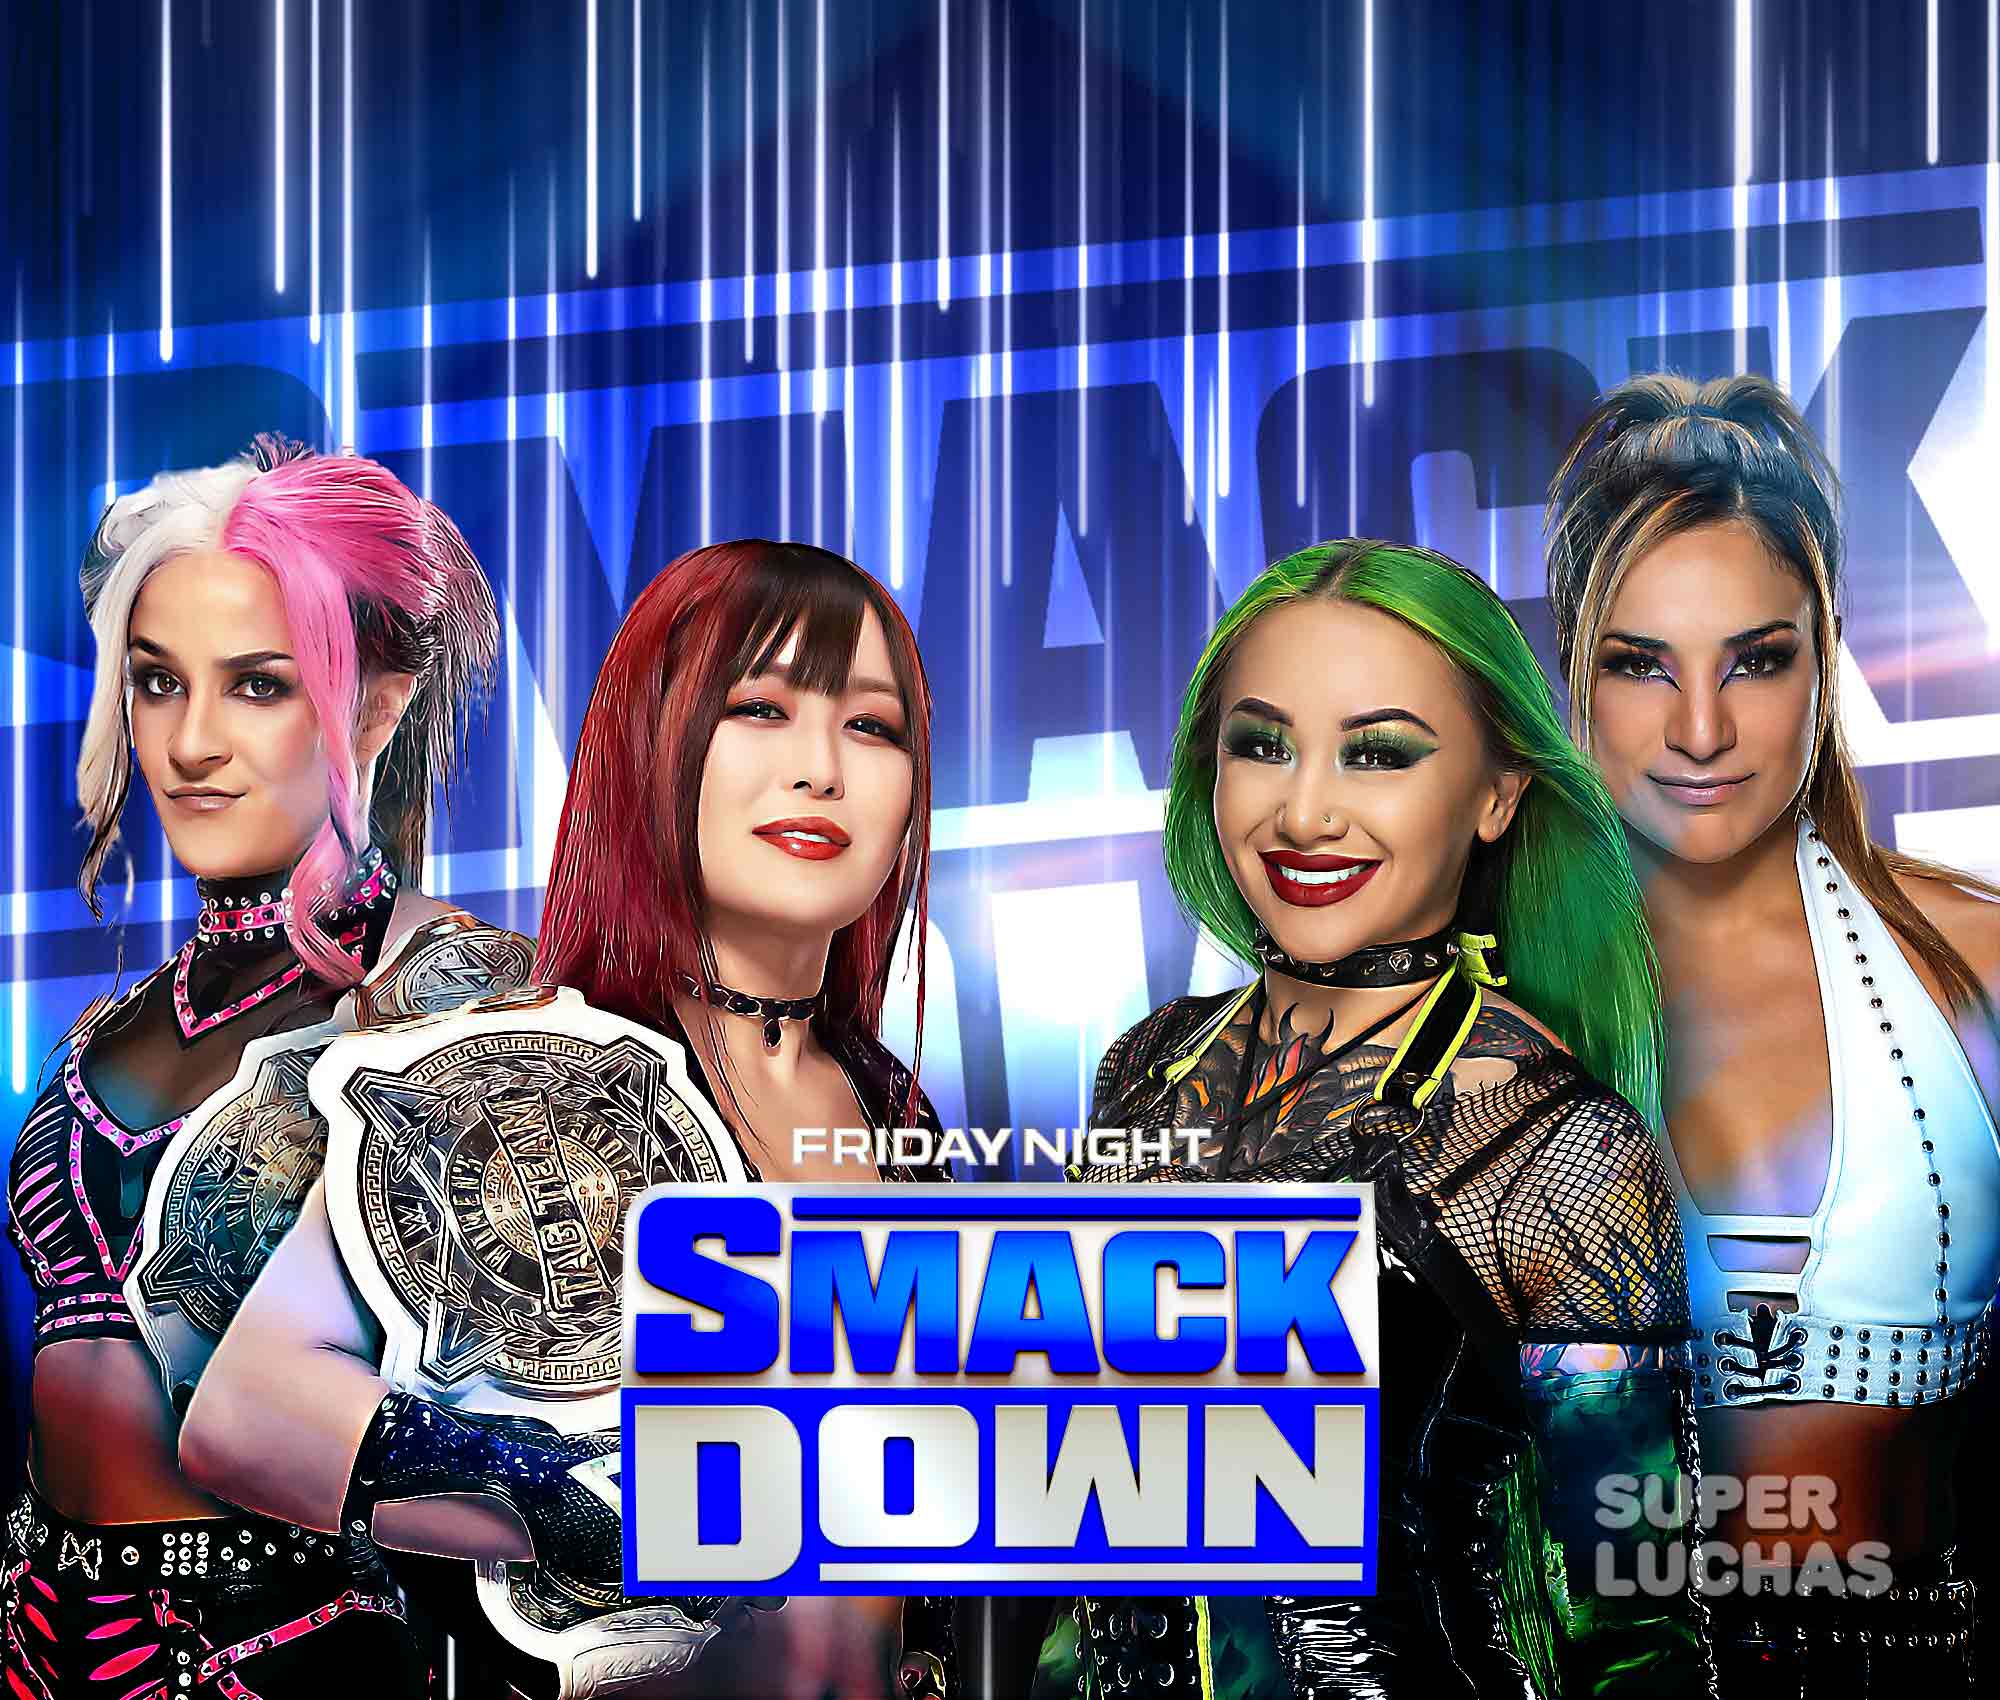 WWE SMACKDOWN October 21 2022 live results